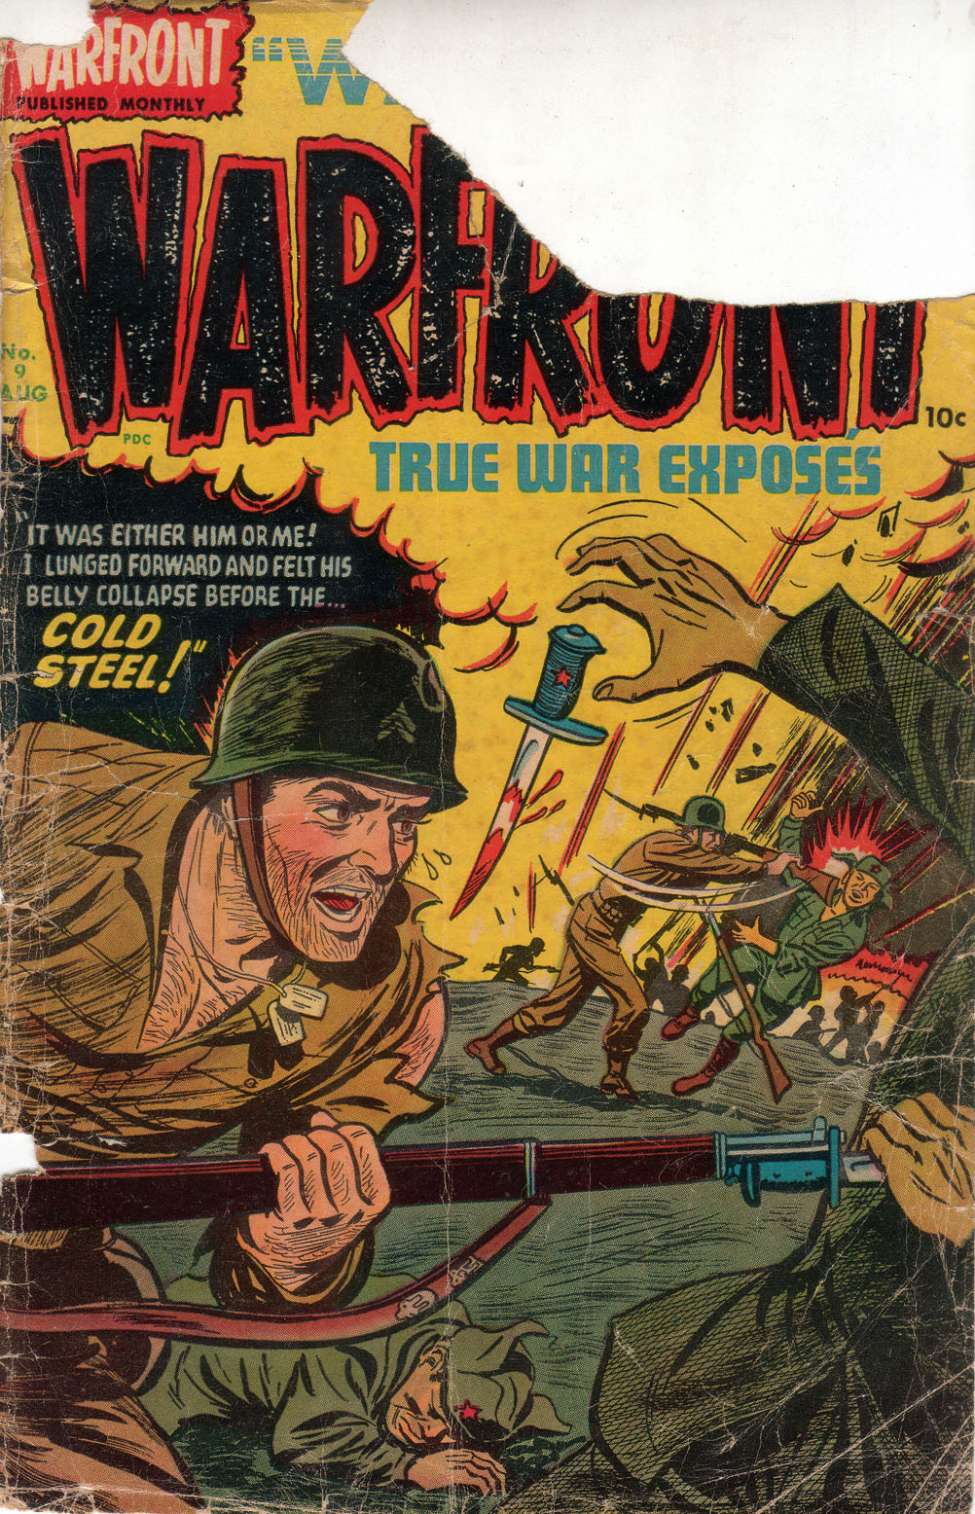 Comic Book Cover For Warfront 9